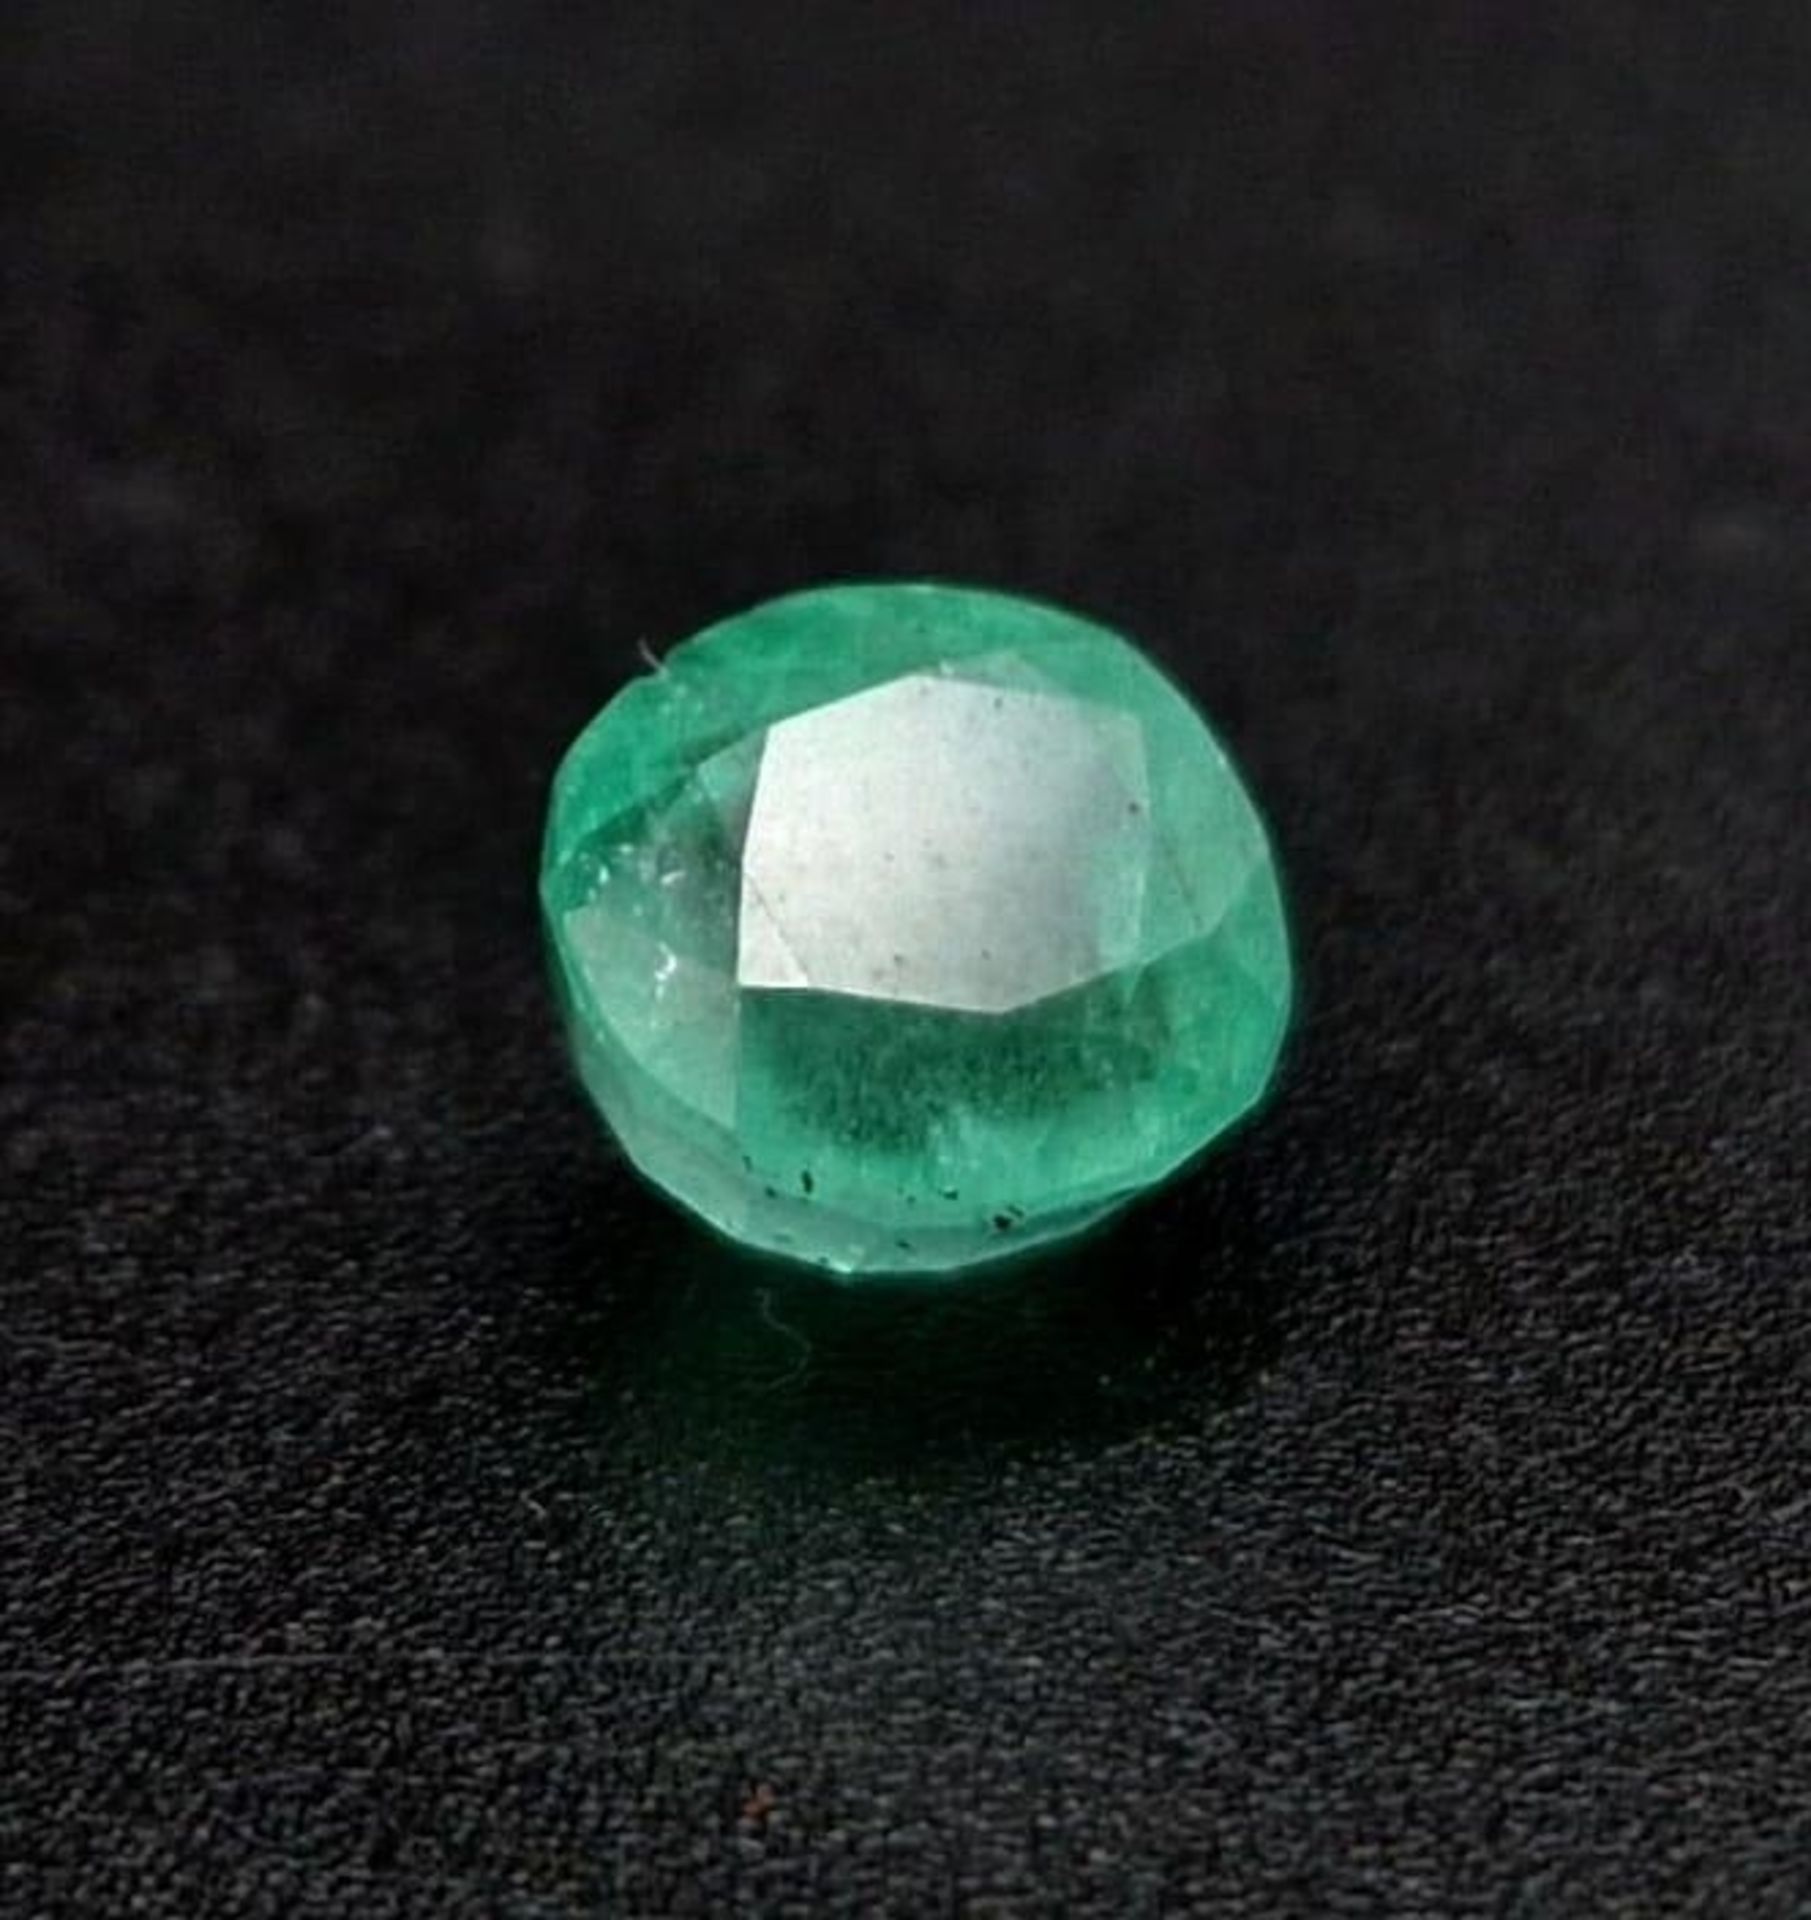 A Rare 2.01ct Oval Cut Emerald from Afghanistan. Untreated, and comes with a GGI certificate. - Image 2 of 5